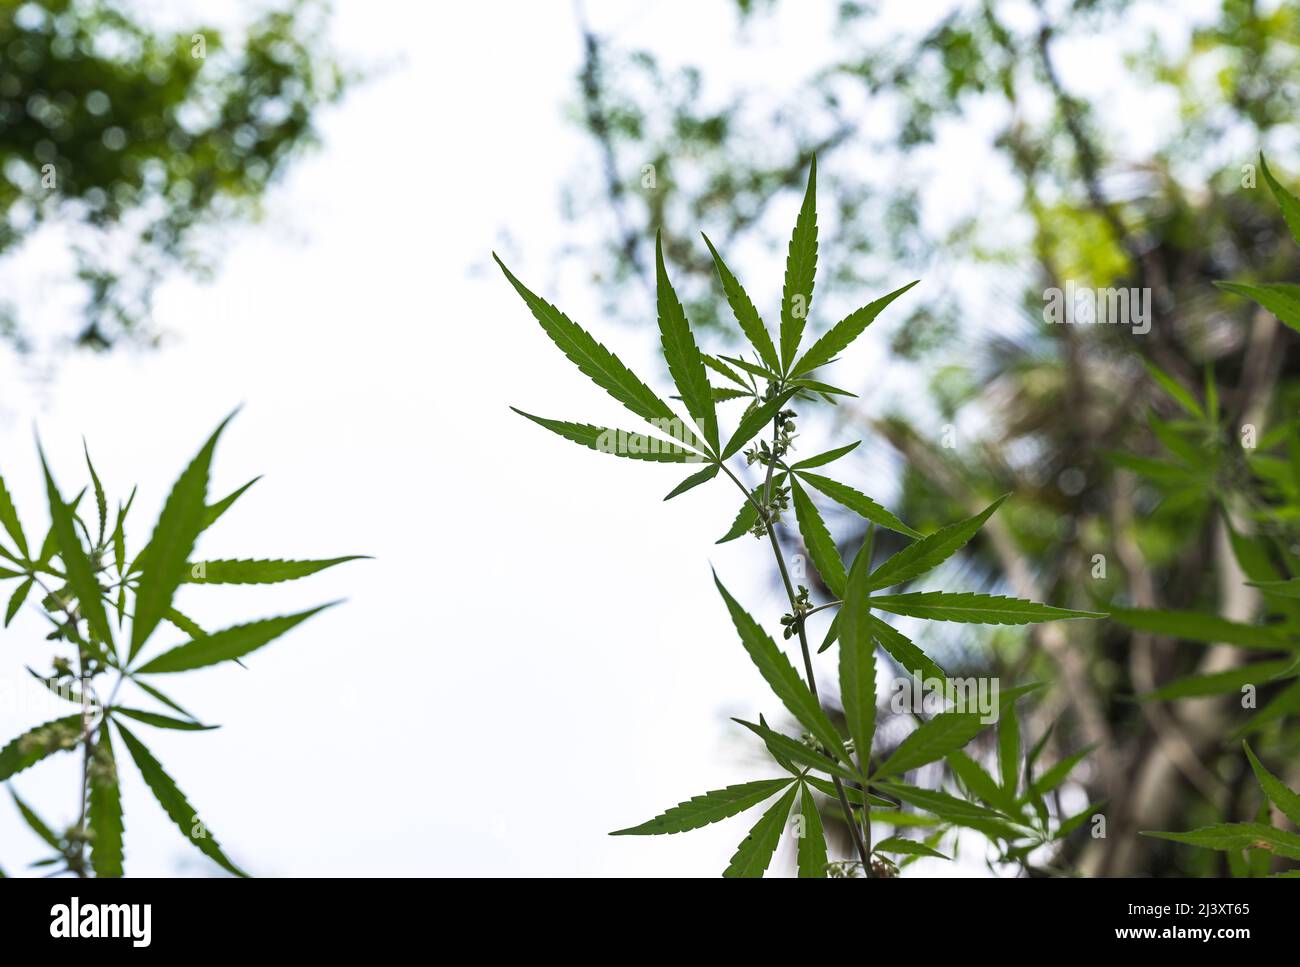 A newly grown Cannabis Plant at Nadia, West Bengal. Cannabis in India has been a very strong mythical and medicinal relationship, known to be used at least as early as 2000 BCE. It has been used by humans throughout recorded history for its food, fibre and medicine. In Indian society, common terms for cannabis preparations include charas (resin), ganja (flower), and bhang (seeds and leaves). The central law that deals with cannabis (weed or marijuana) in India is the Narcotic Drugs and Psychotropic Substances Act, 1985 which restricts Cannabis cultivation. India. Stock Photo